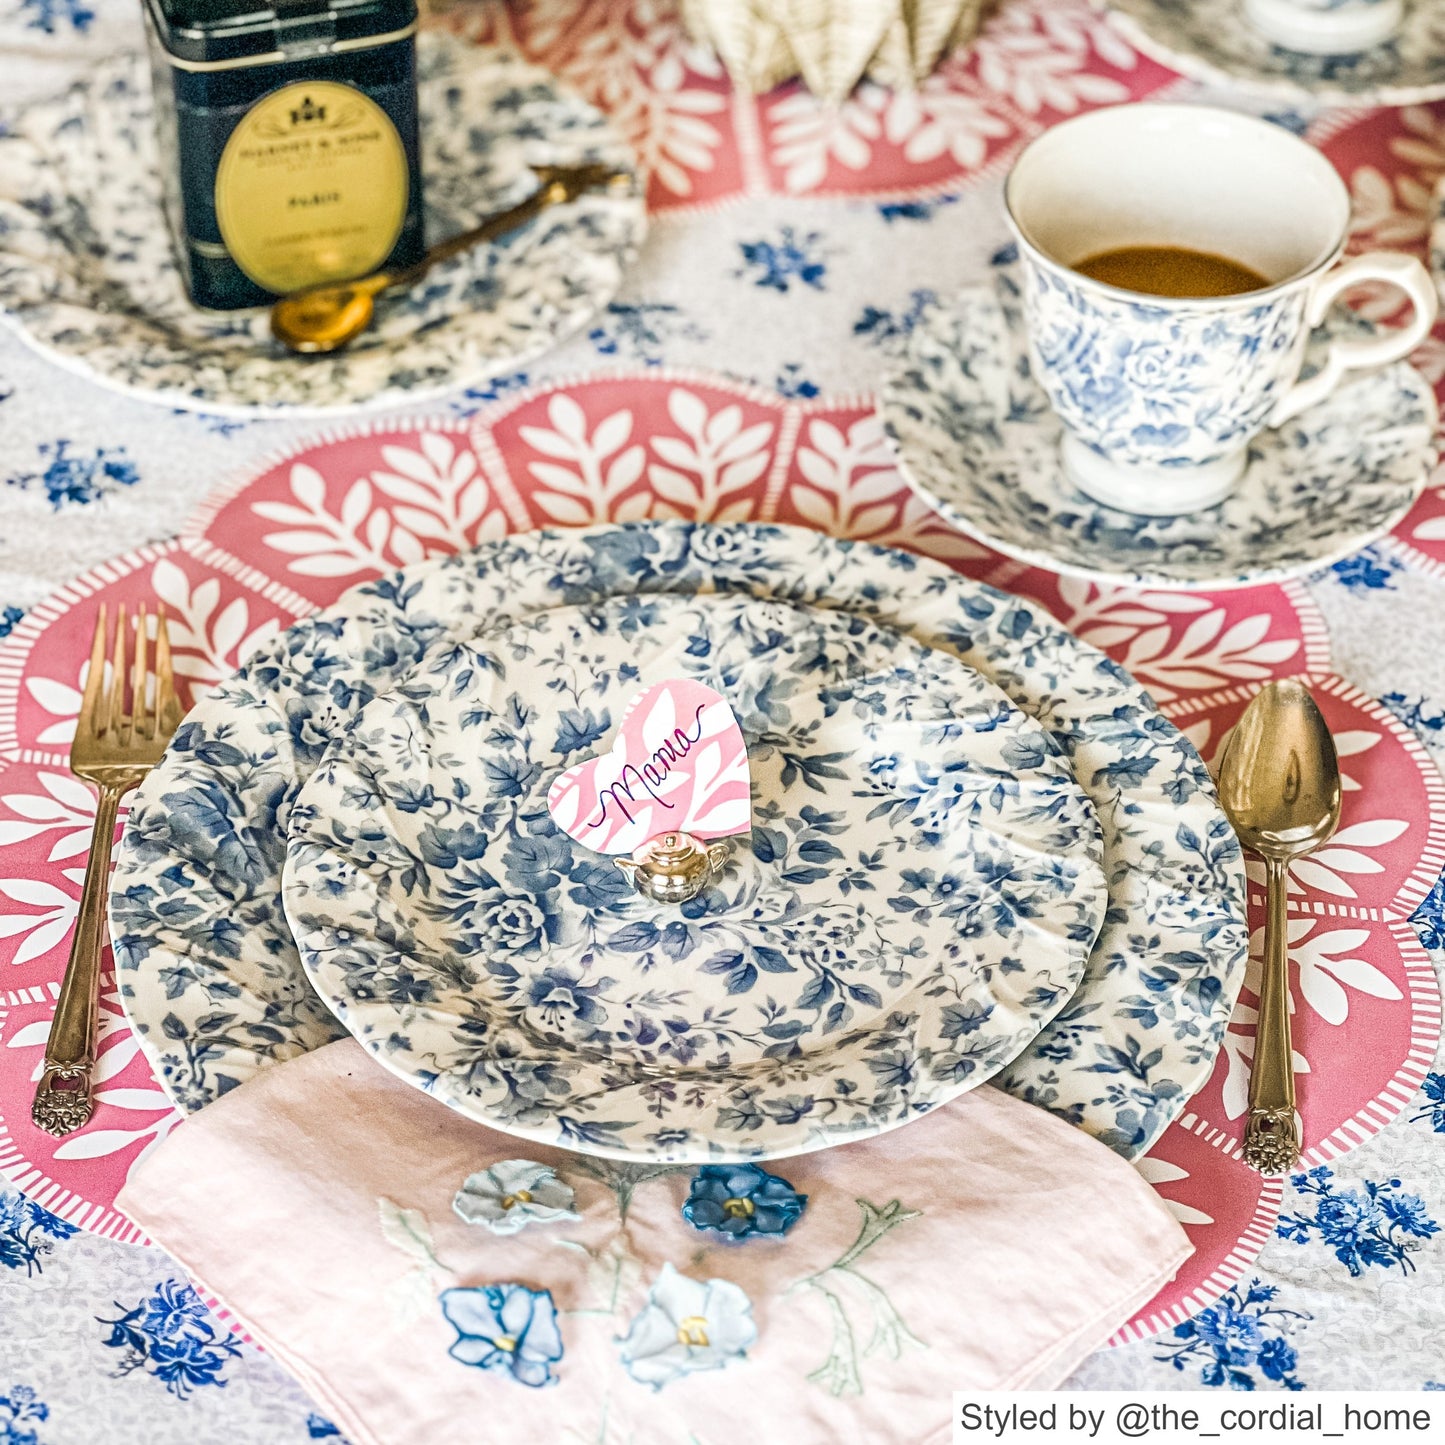 Place setting with a pink and white scalloped round paper placemat layered with blue and white floral dishes and a pink heart place card